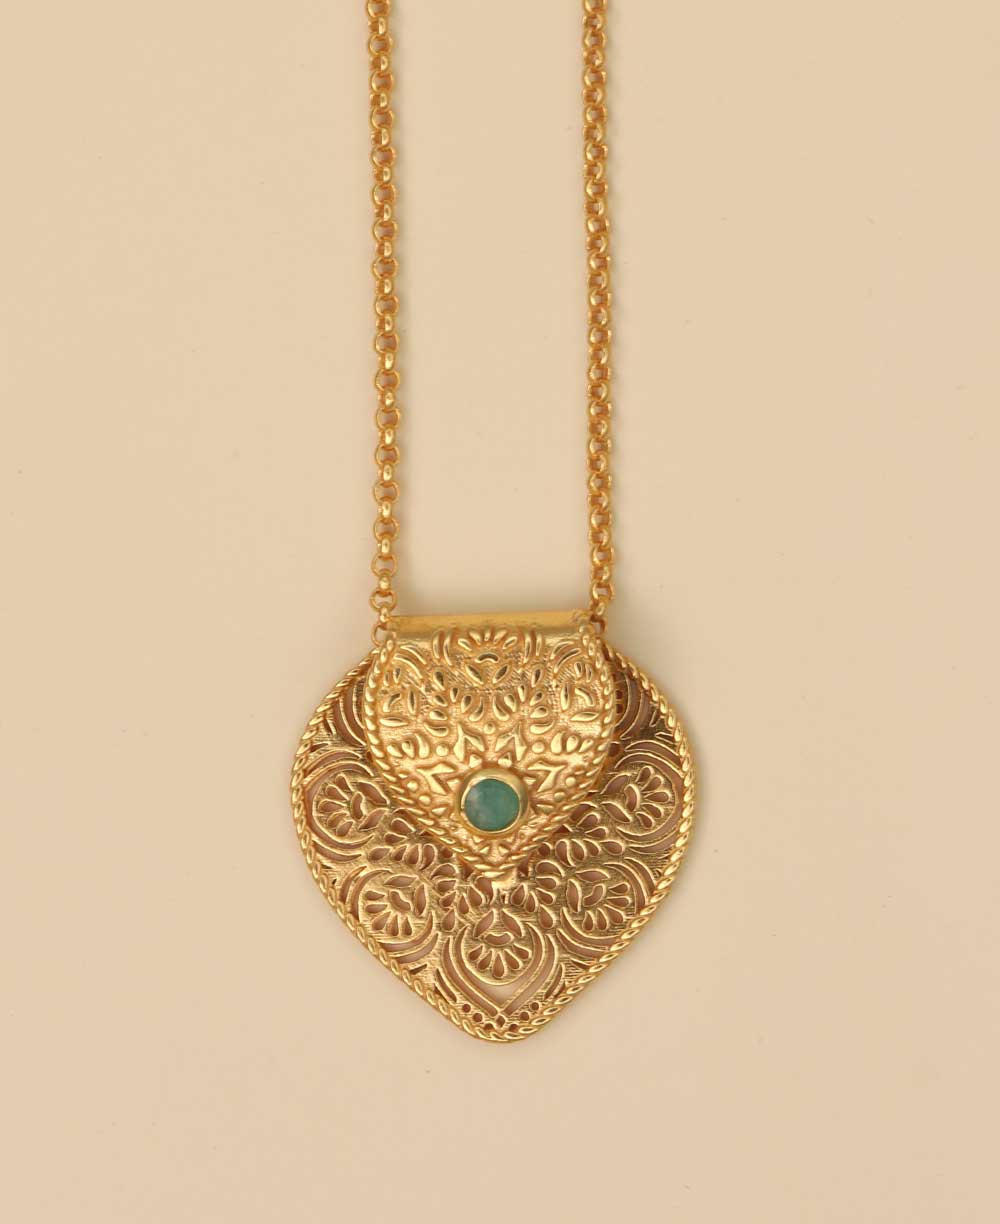 Birthstone Gemstone Gold Plated Brass Lotus Petal Mandala Necklace - Necklaces May (Emerald)